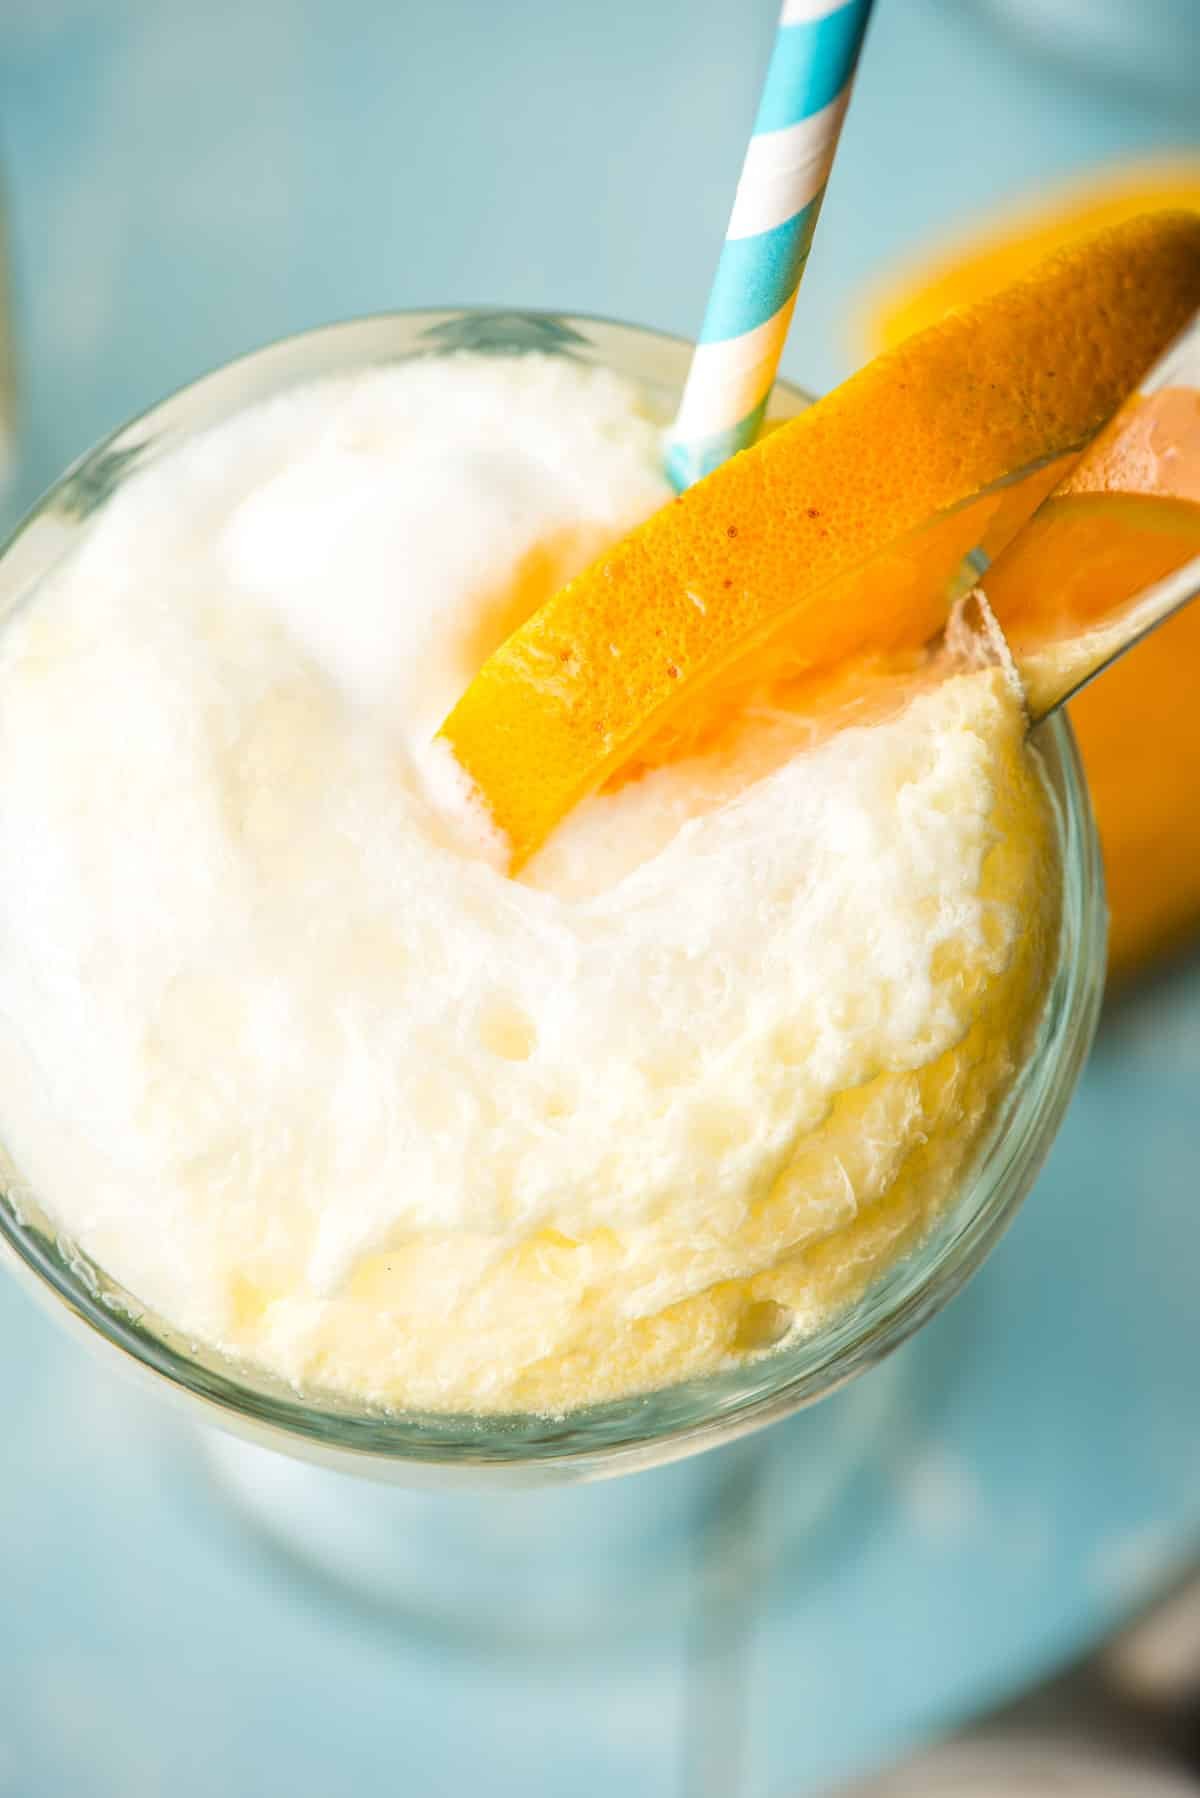 The frothy, bubbly top of an orange float, garnished with an orange wedge.